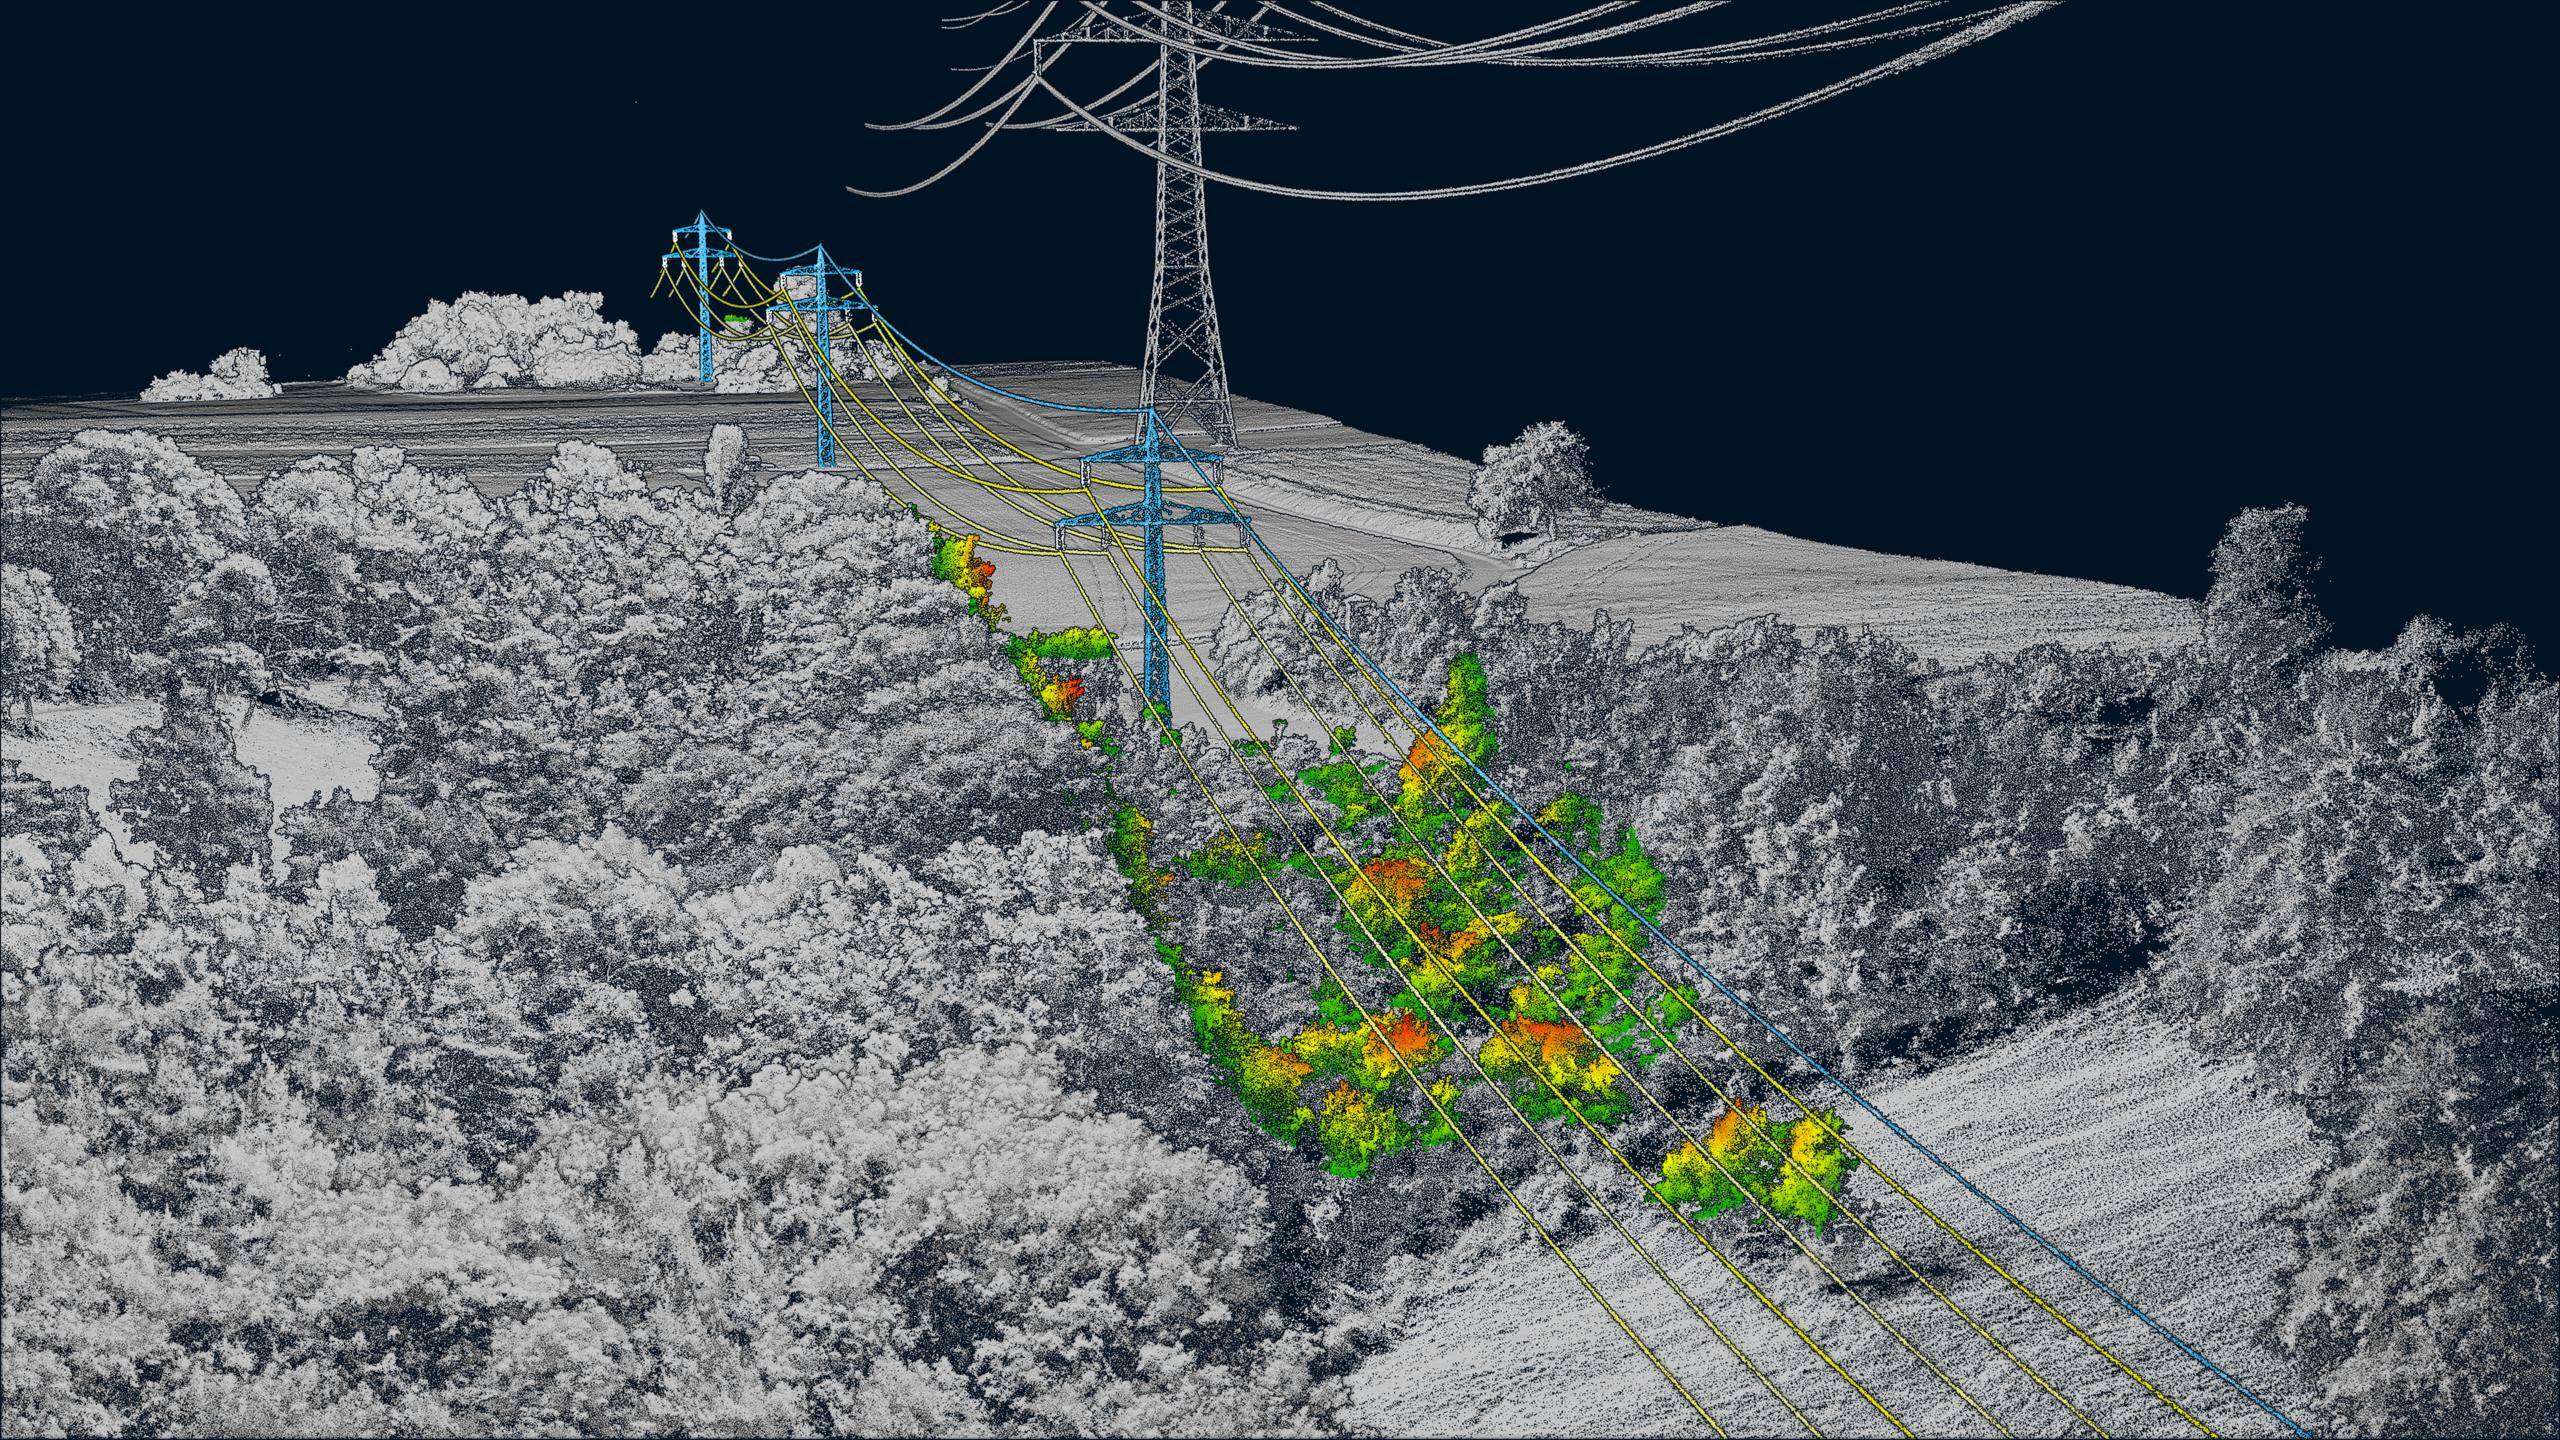 ULS point cloud of Powerline Survey and Vegetation Analysis